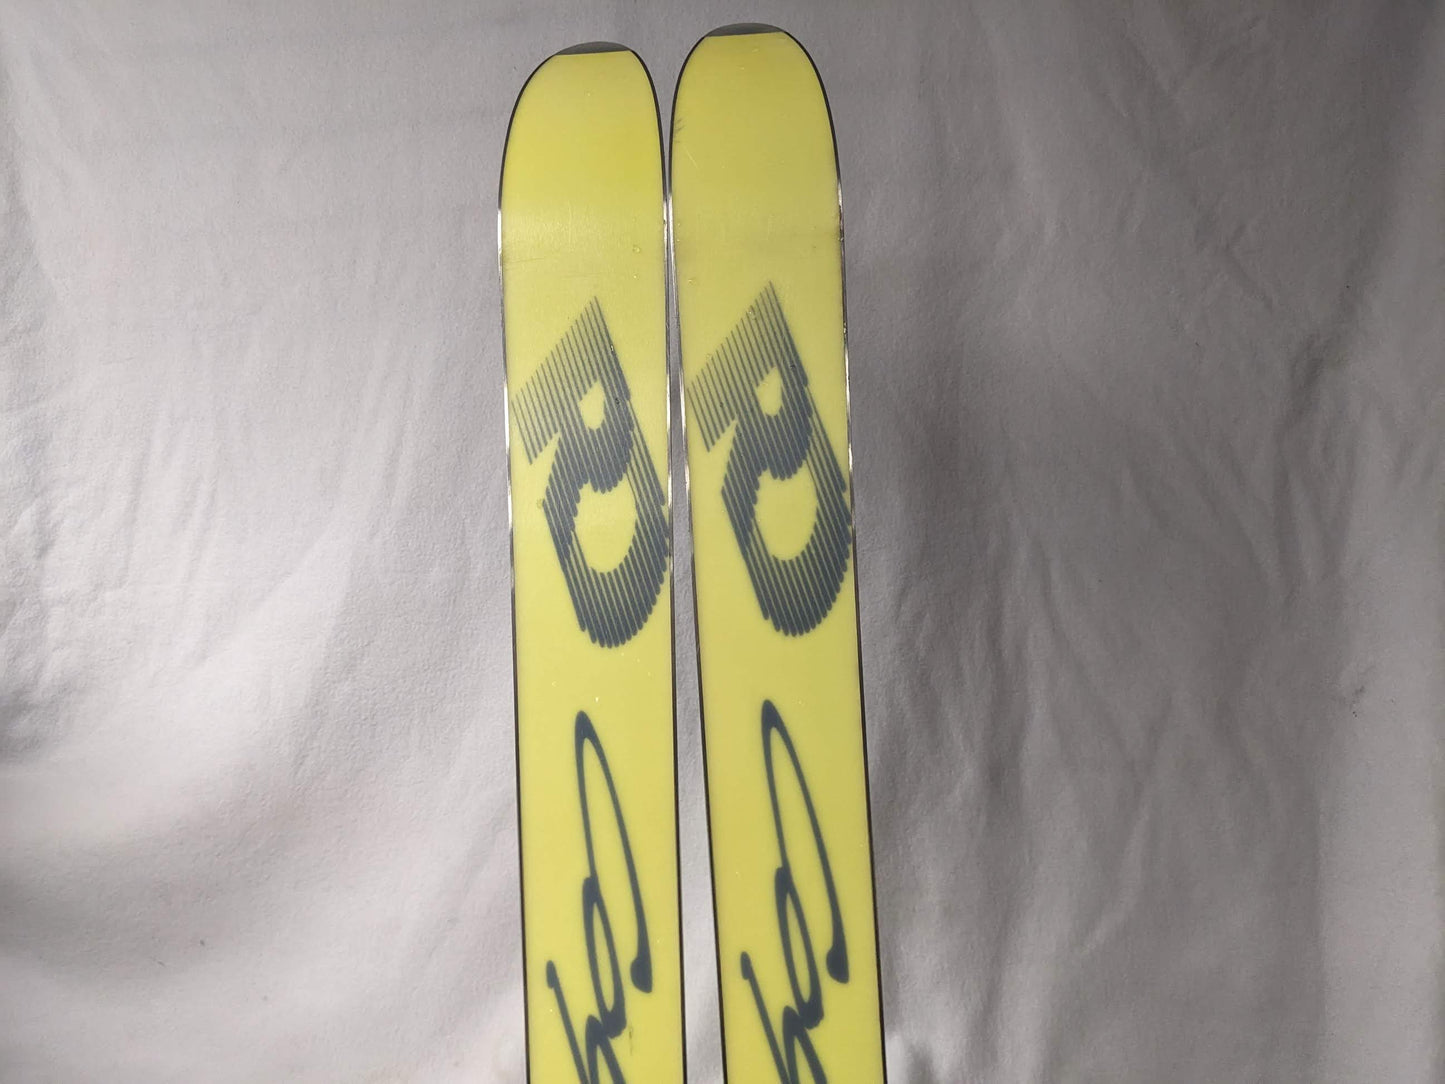 RD Coyote Tuan All Mountain Skis *No Bindings* Size 175 Cm Color Black Condition Used